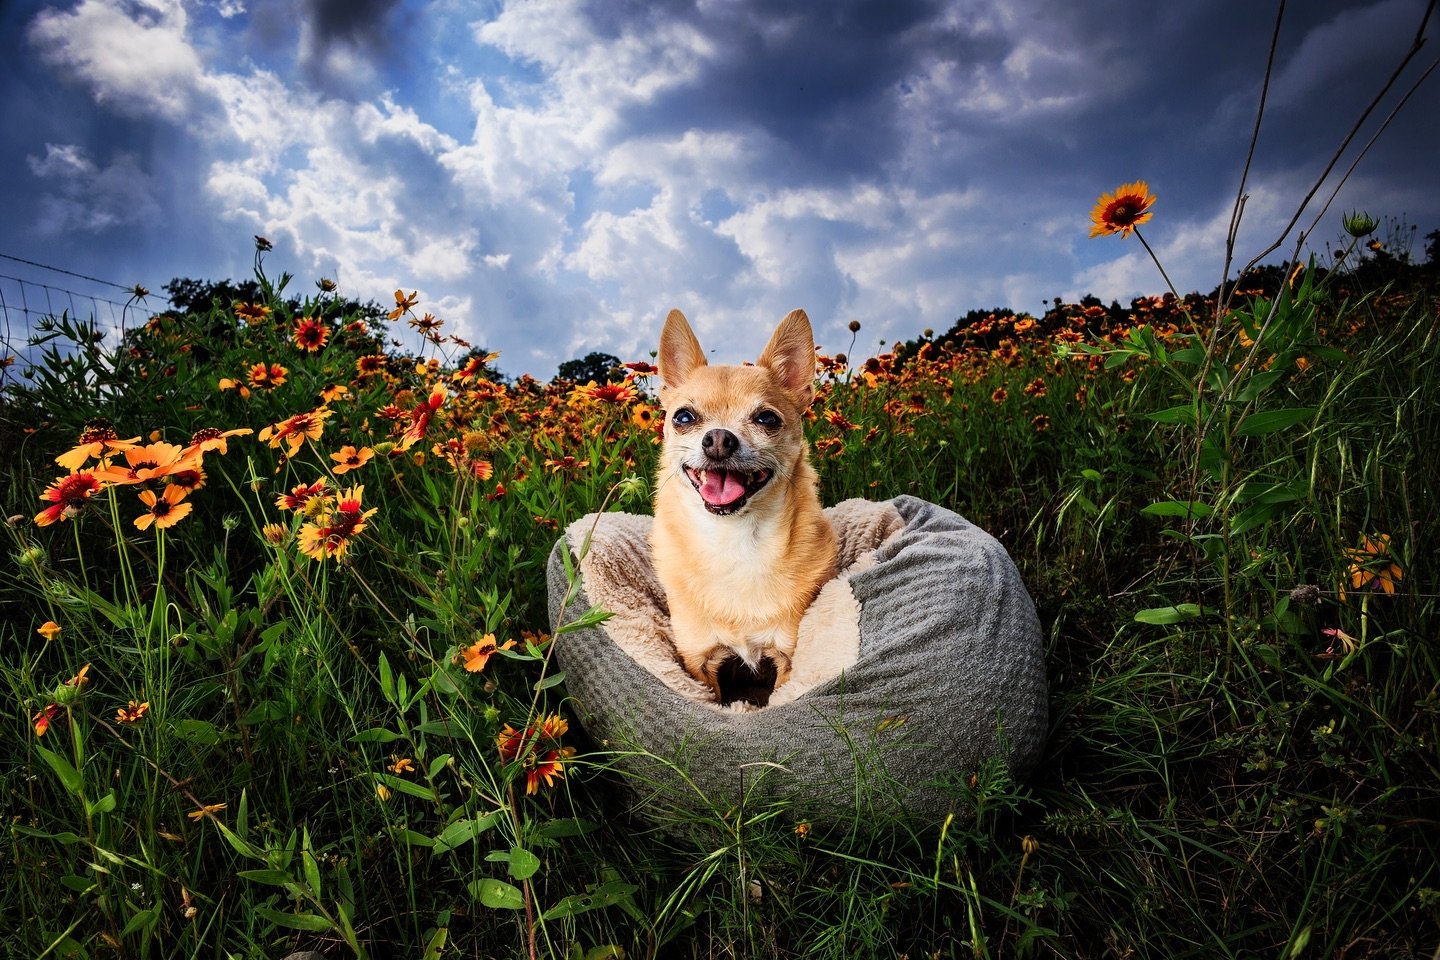 Today I took Jellybean on a scenic drive through the hill country. We stopped to admire the wildflowers up close. I let her enjoy them from the comfort of her bed. The wildflowers are no place for a little chihuahua- she&rsquo;s like a tube of chapst